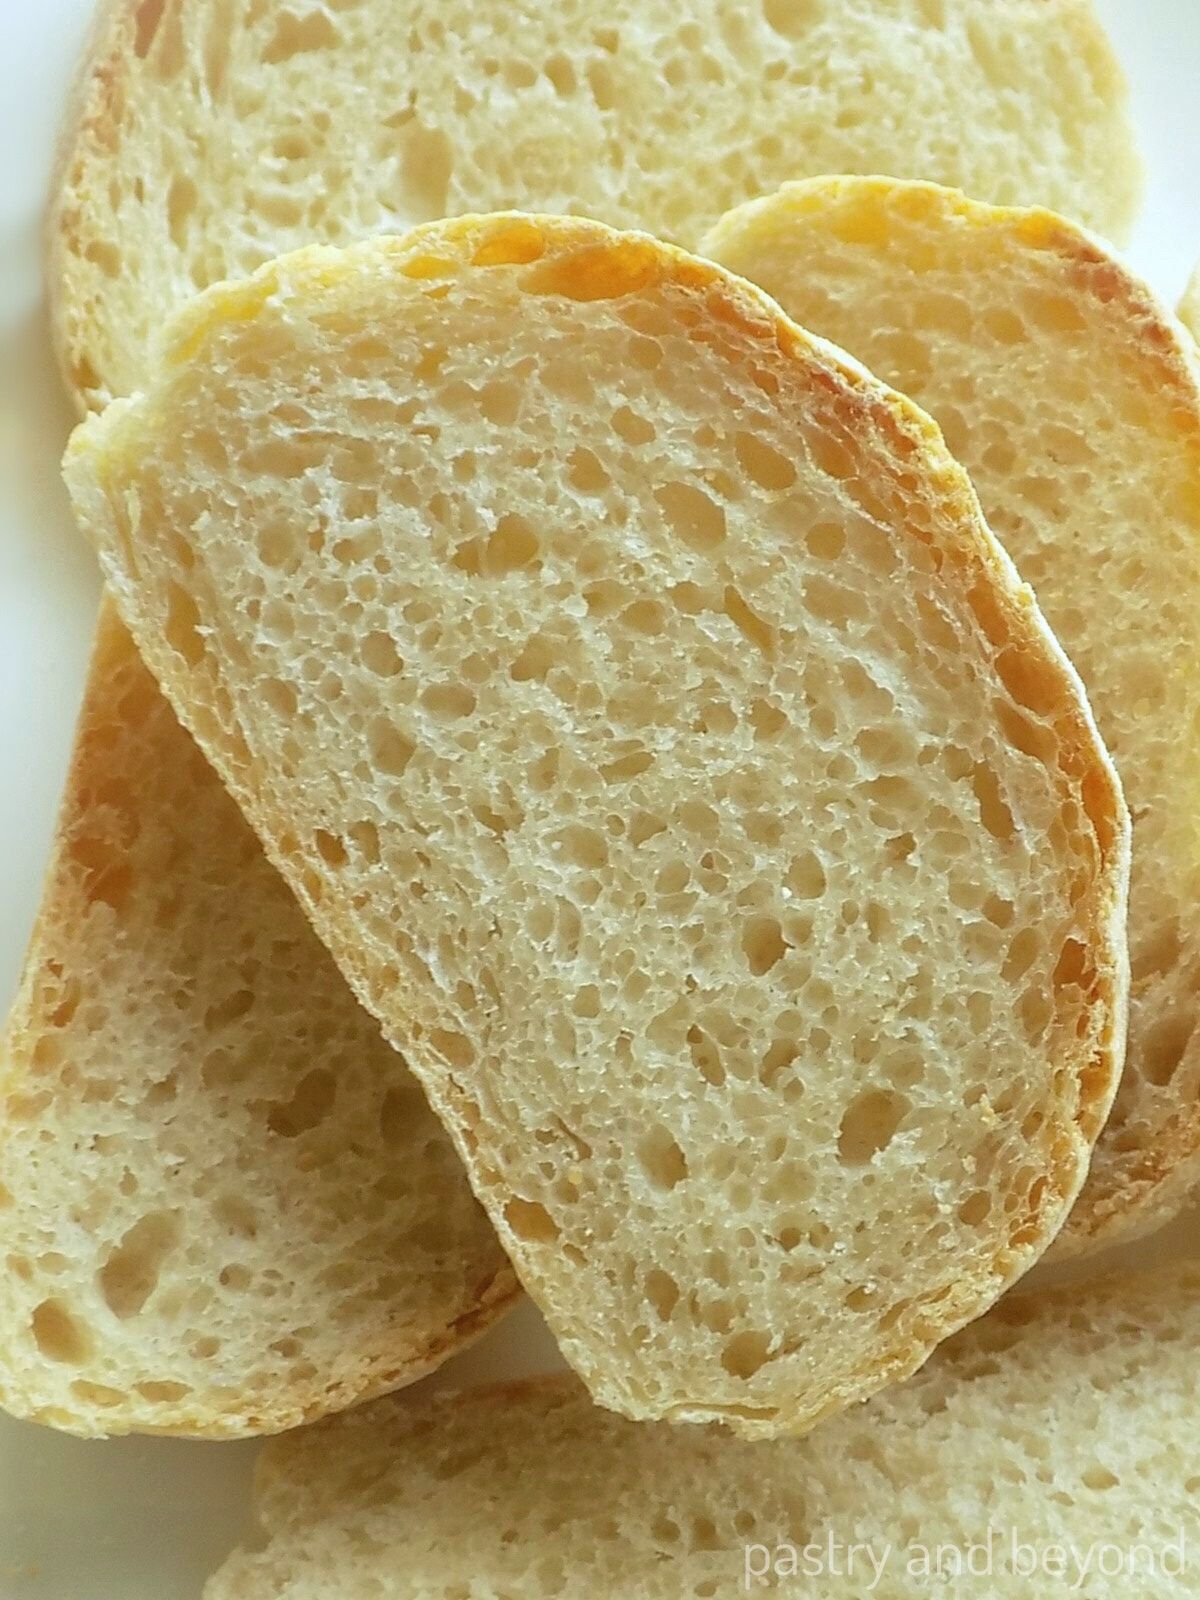 Homemade no knead bread slices on a white surface.